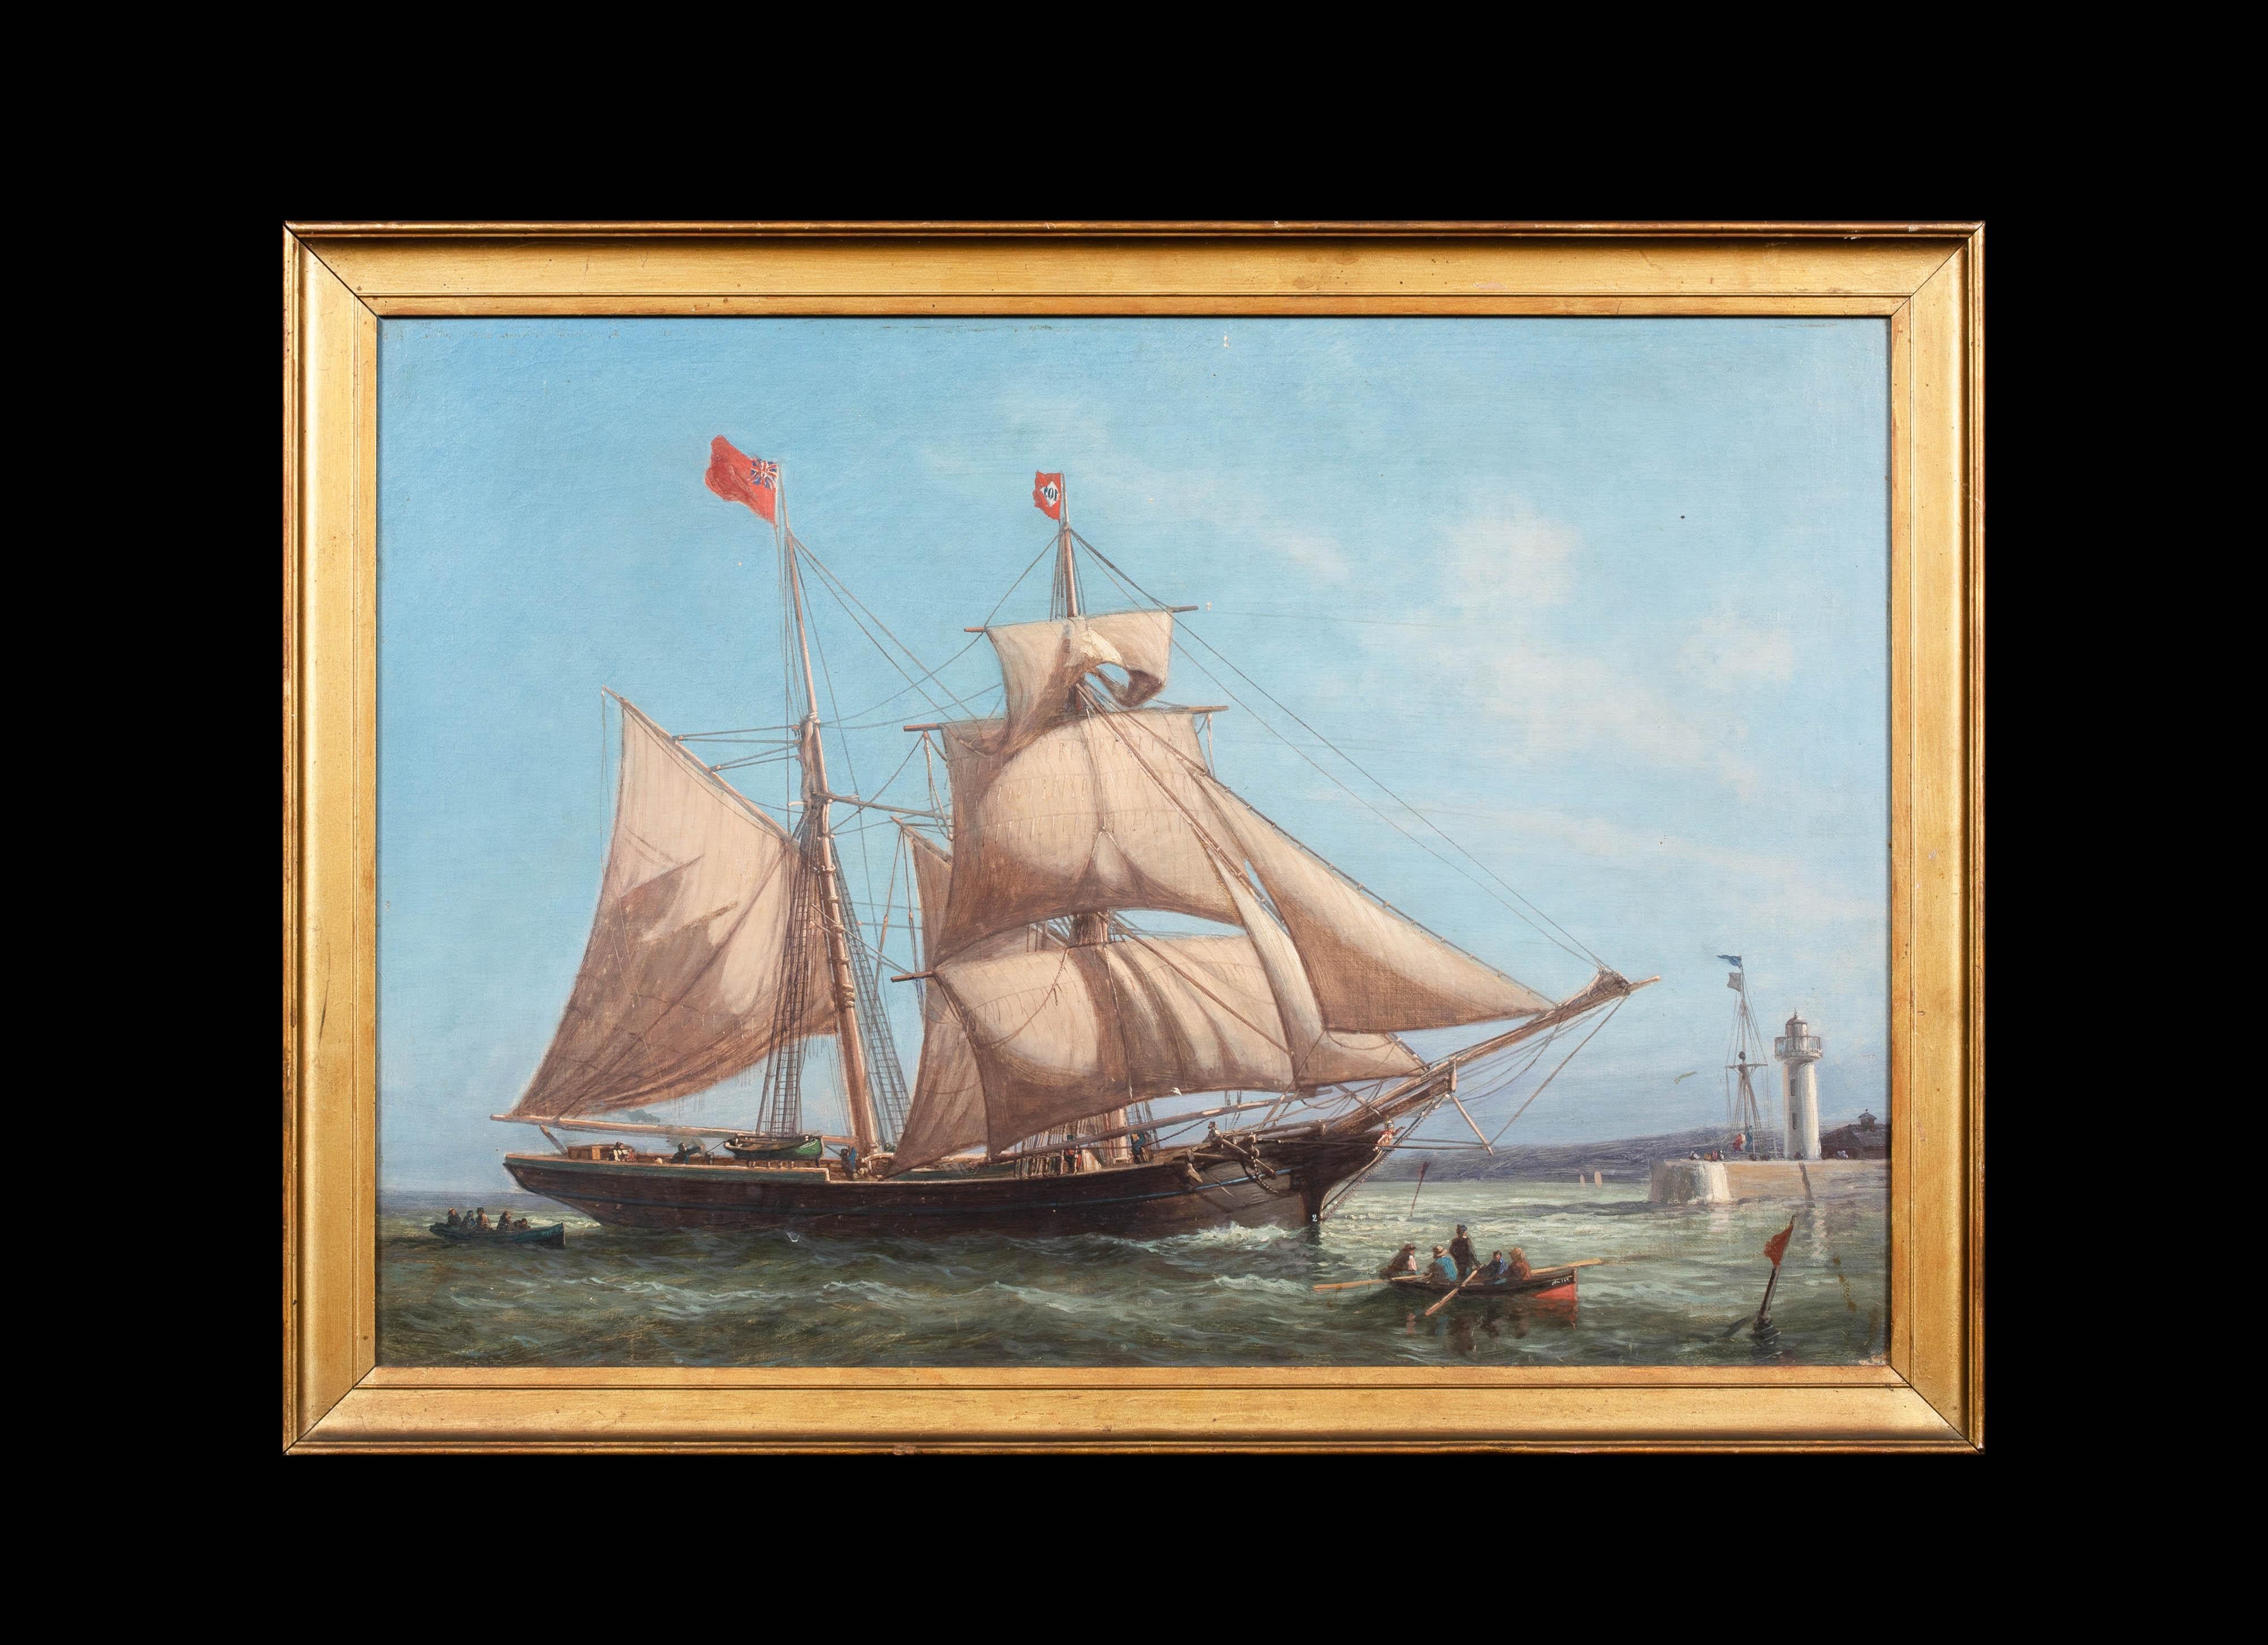 British Schooner Ship Entering Jersey / Guernsey Harbour Port, 19th Century - Painting by Unknown